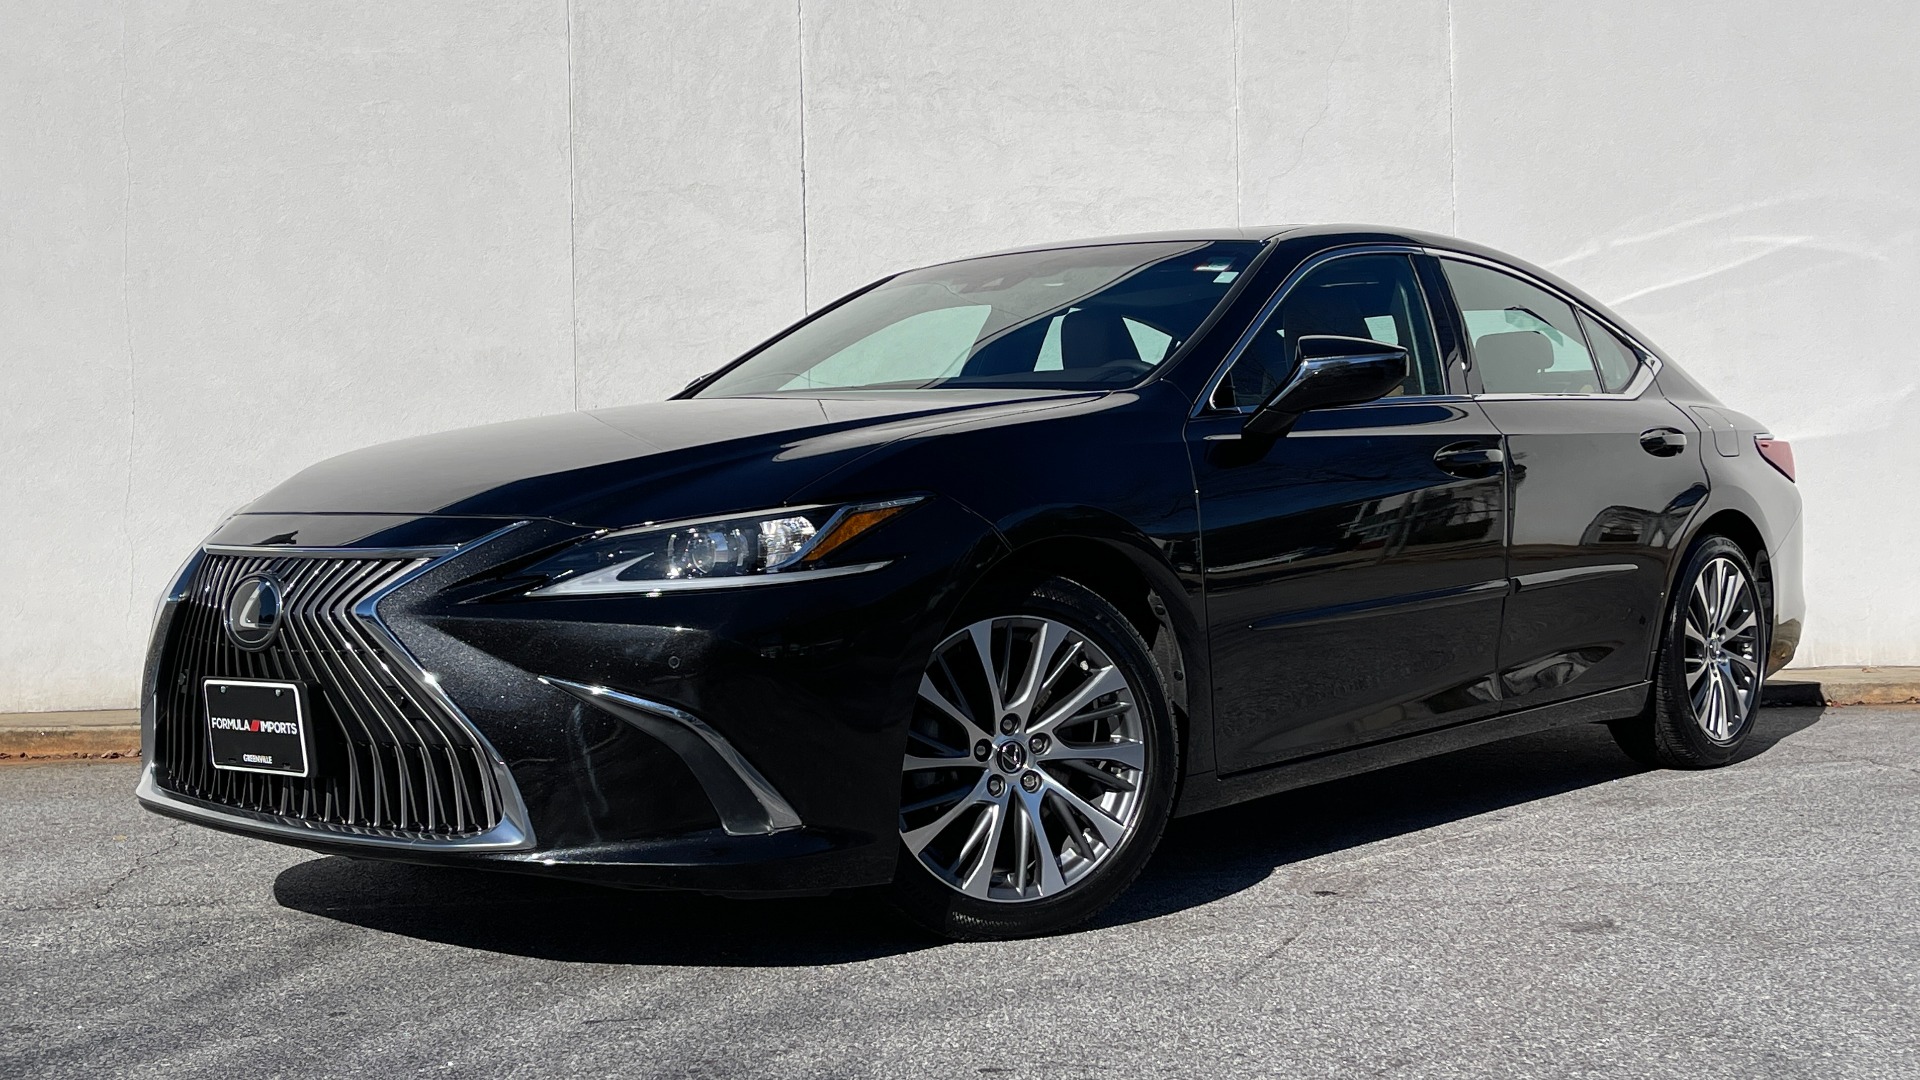 Used 2020 Lexus ES 350 PREMIUM 3.5L SEDAN / BSM / MEMORY / SUNROOF / HTD STS / REARVIEW for sale $40,995 at Formula Imports in Charlotte NC 28227 1